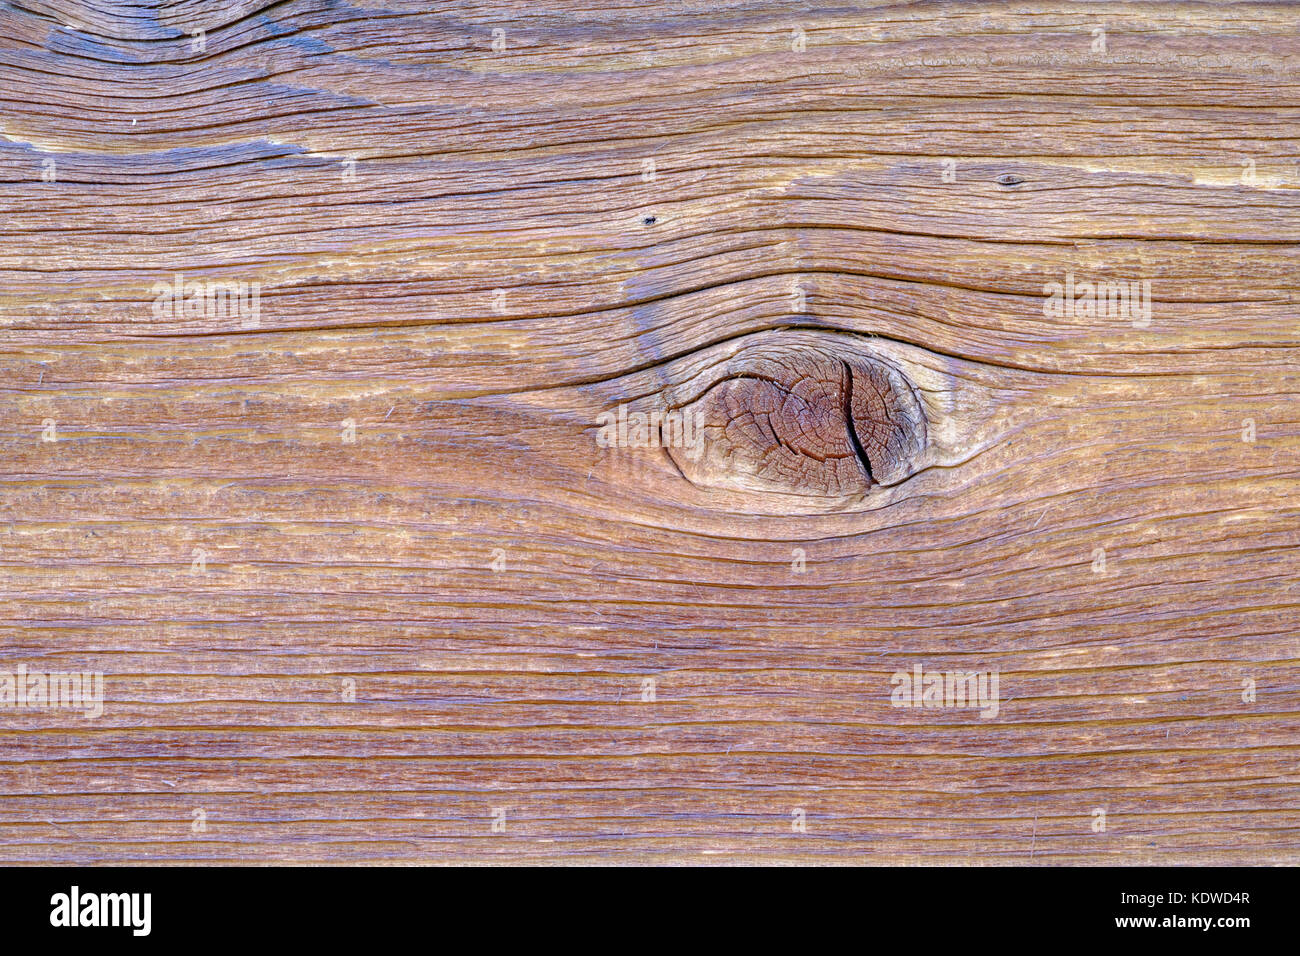 Weathered timber boards showing detail of wood grain and knots Stock Photo